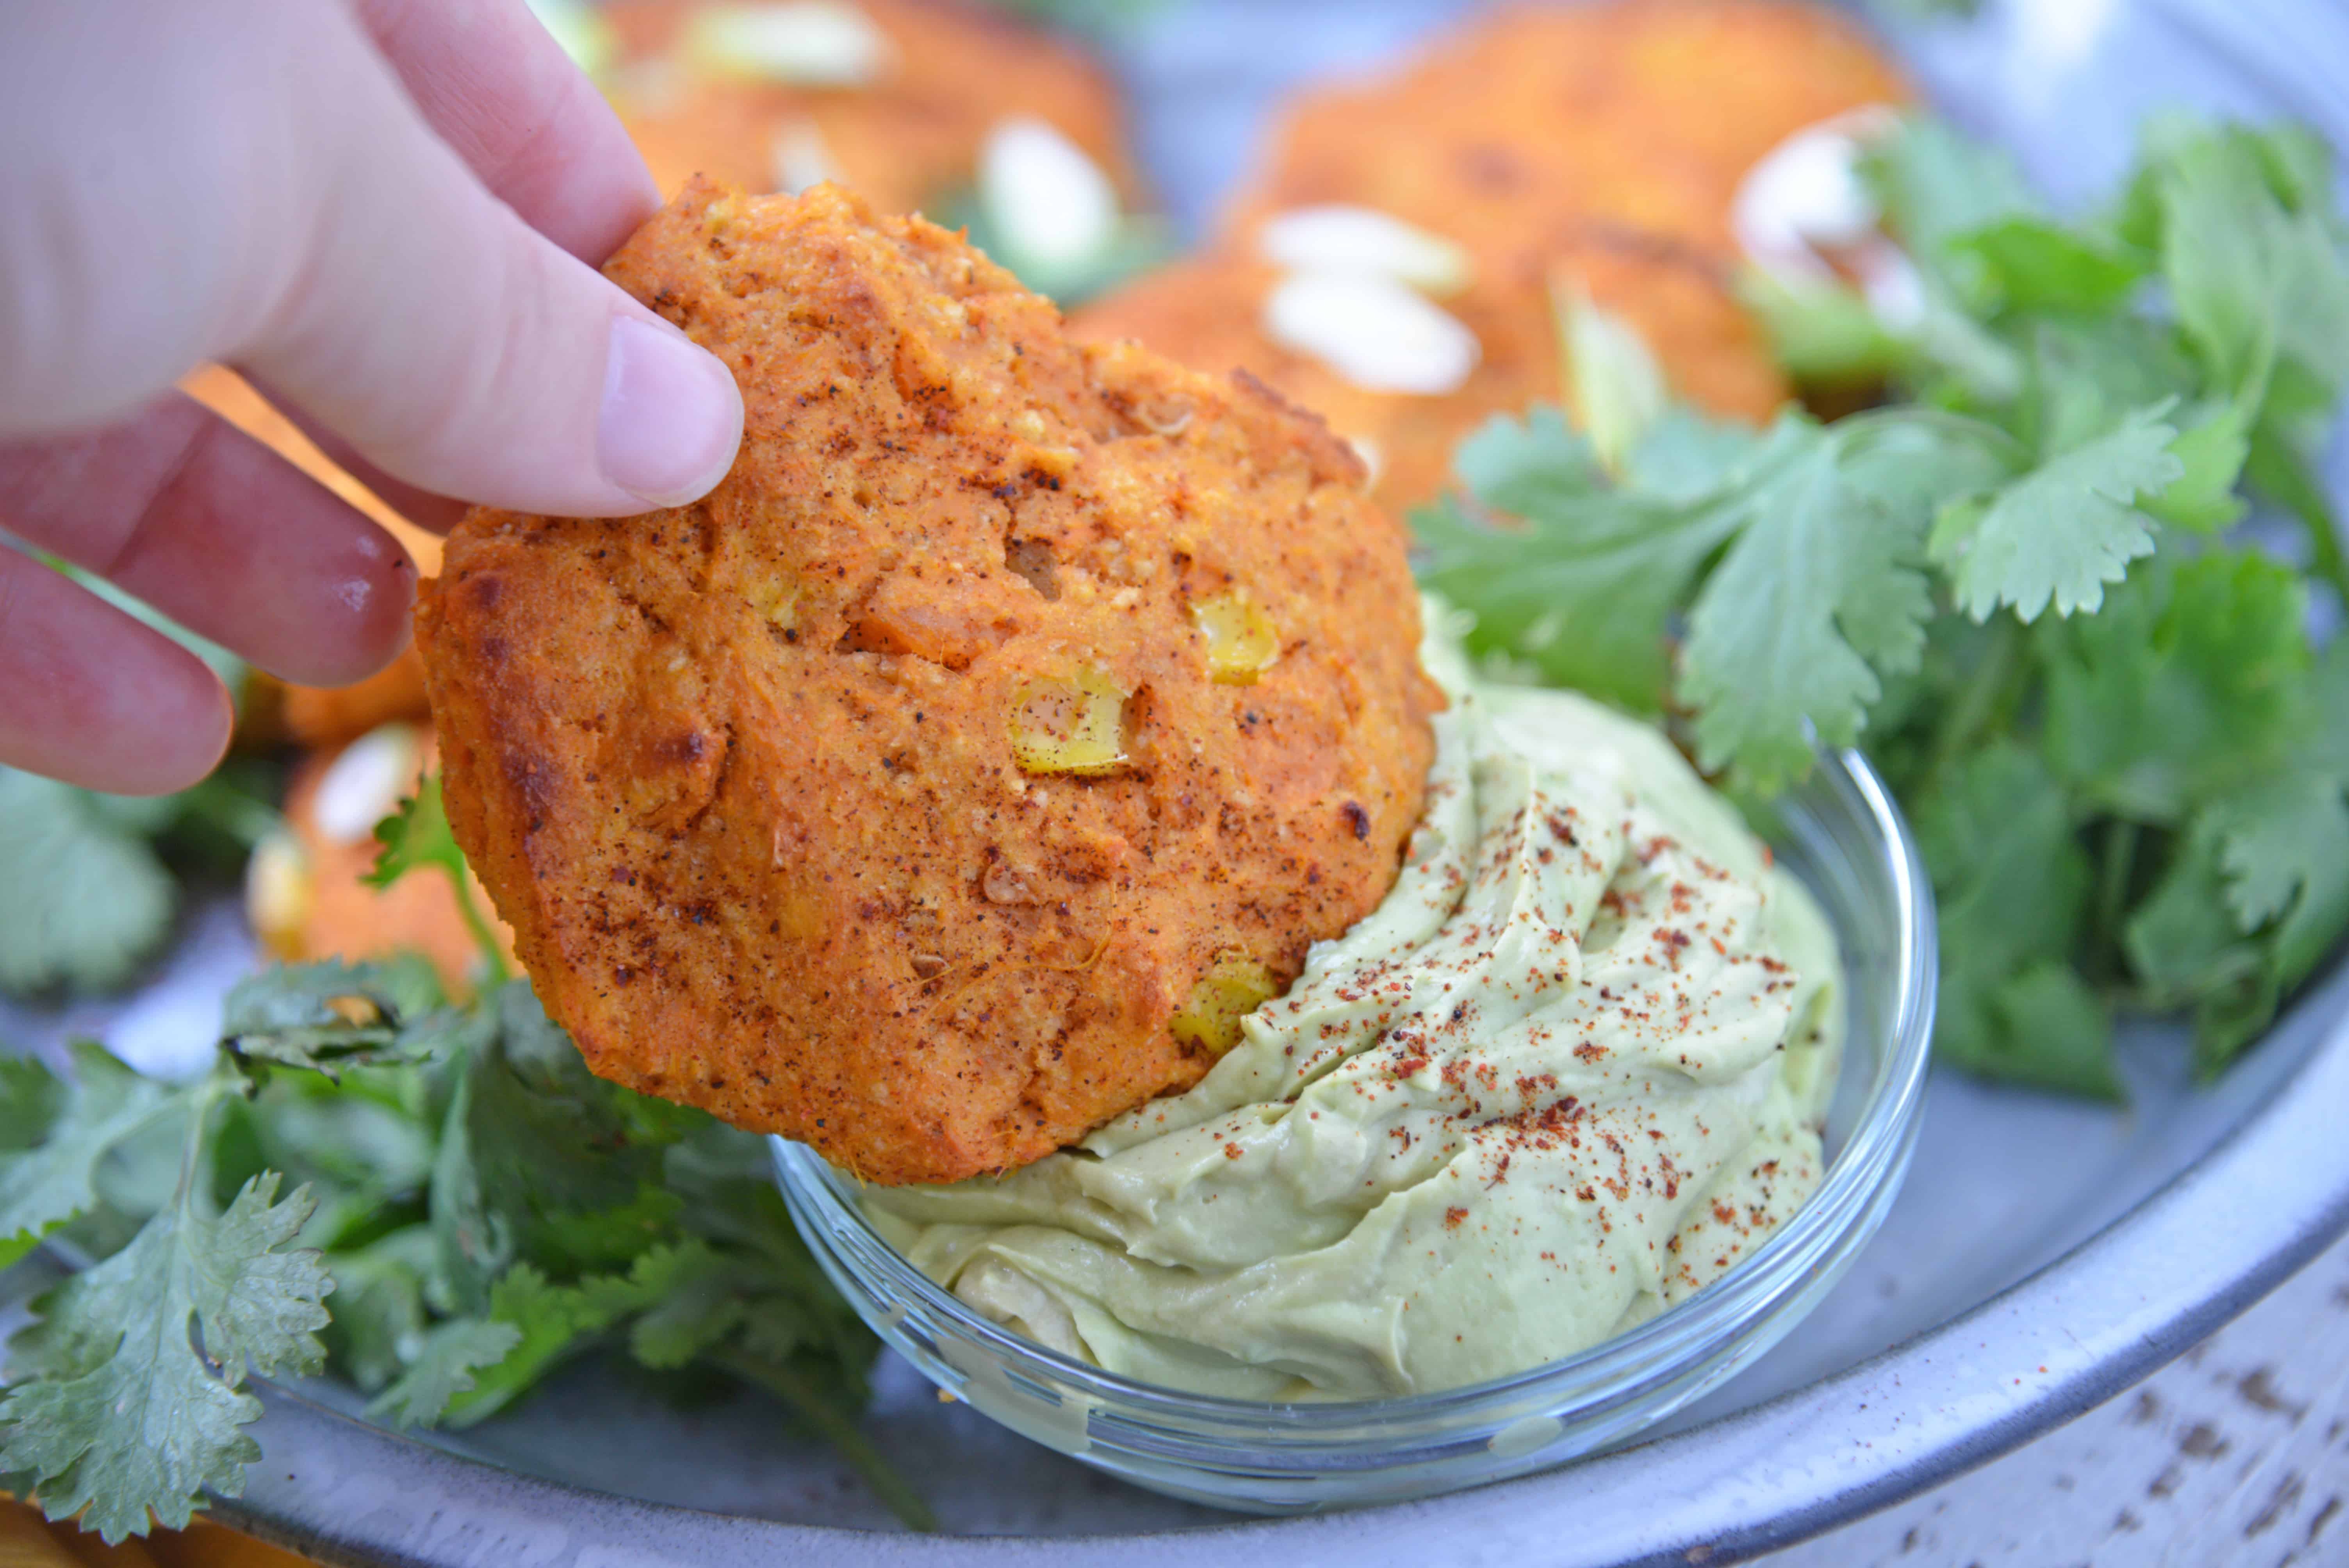 Southwestern Sweet Potato Pancakes are made with mashed sweet potatoes, green chile, corn and southwest spices making then sweet and smoky. Served with a cool, avocado dipping sauce. #potatopancakes #sweetpotatorecipe www.savoryexperiments.com